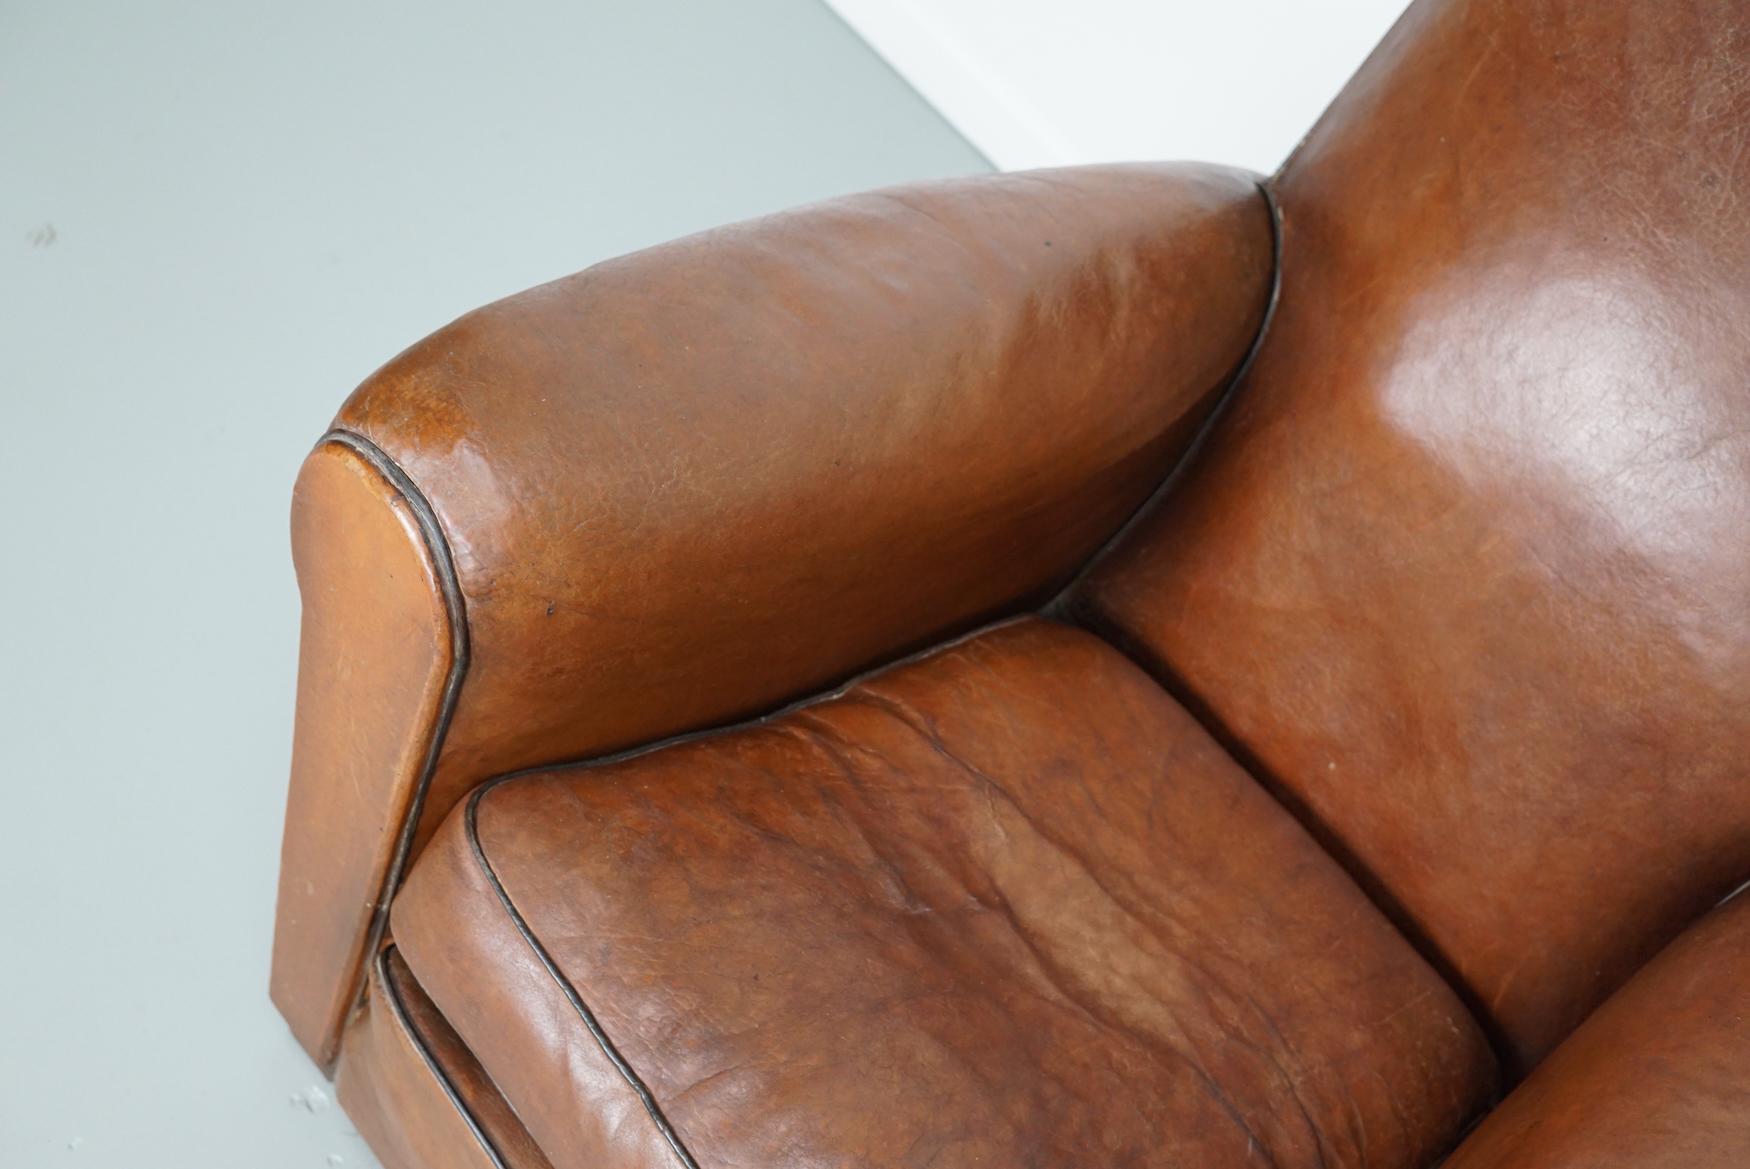 Pair of French Cognac Moustache Back Leather Club Chairs, 1940s 3